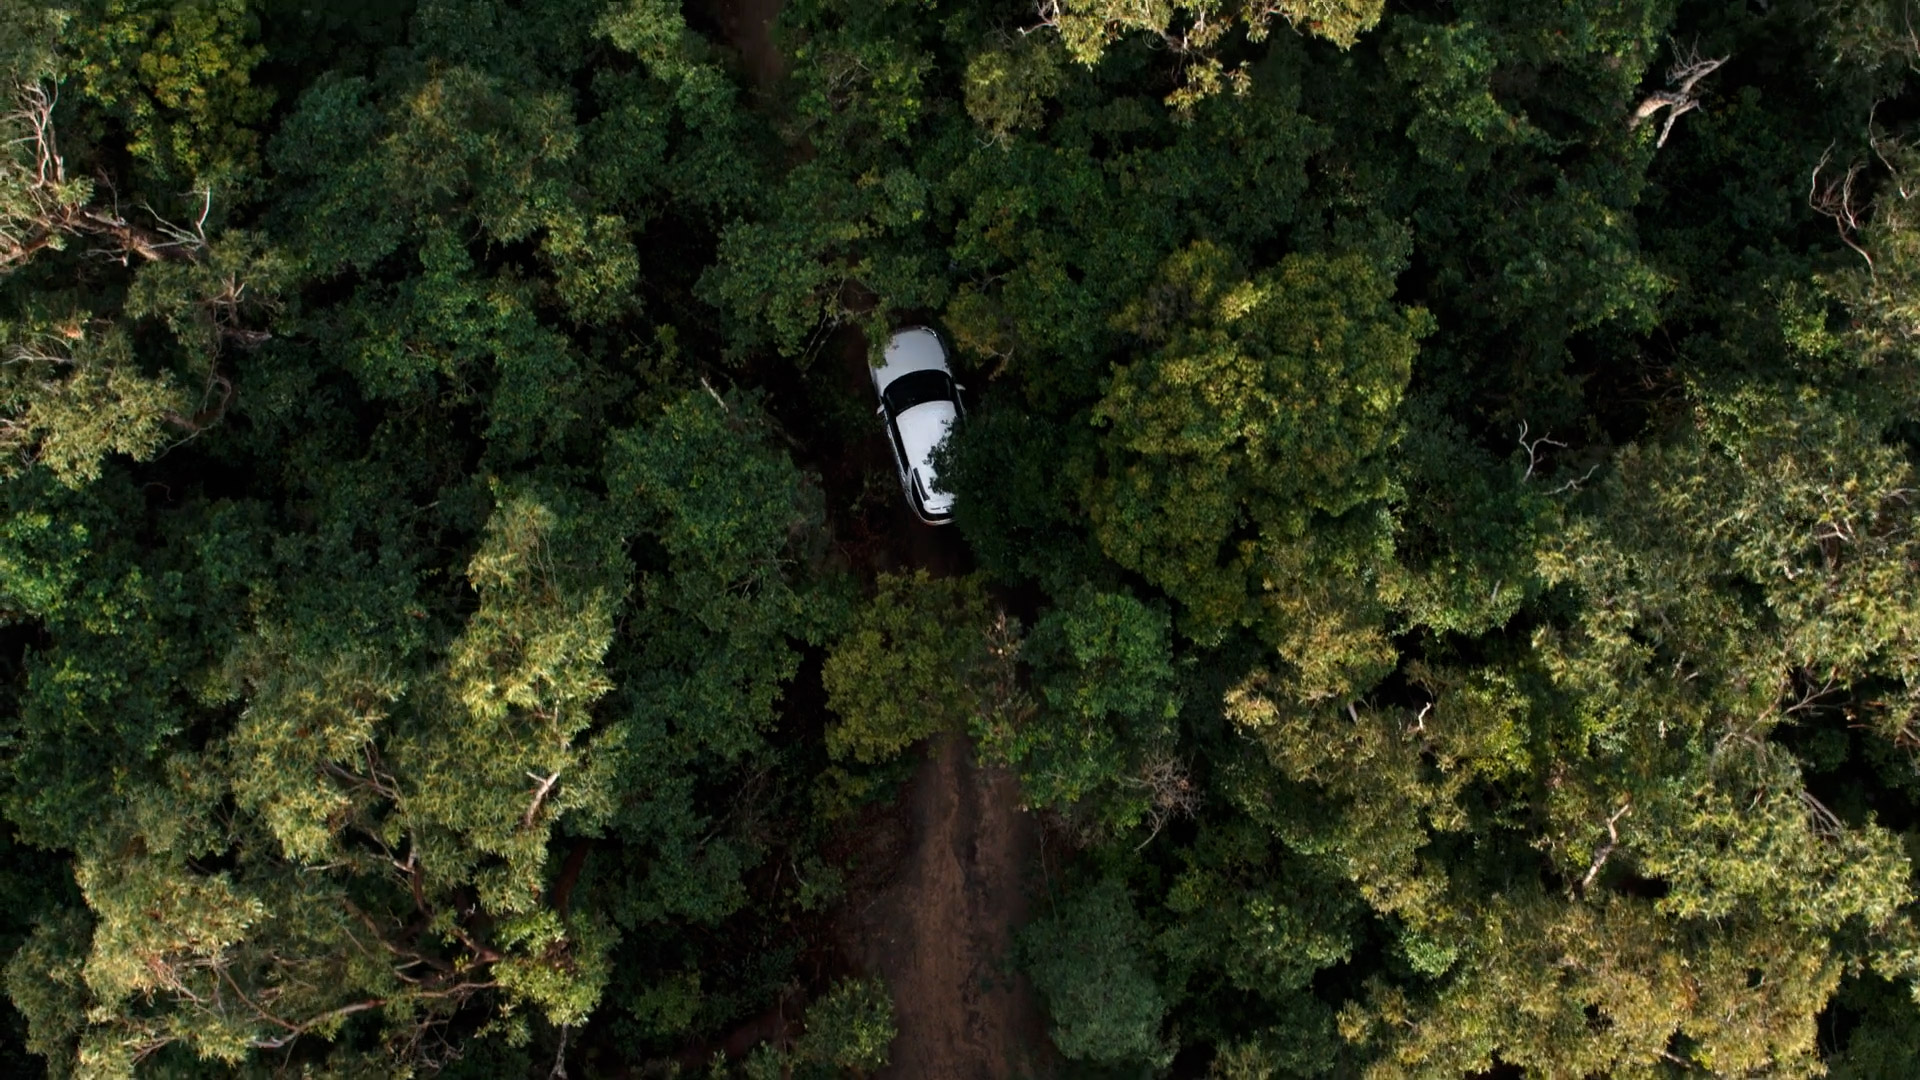 Land-Rover-Discovery-Campaign_DroneFX Ollie Davies Aerial-04.jpg